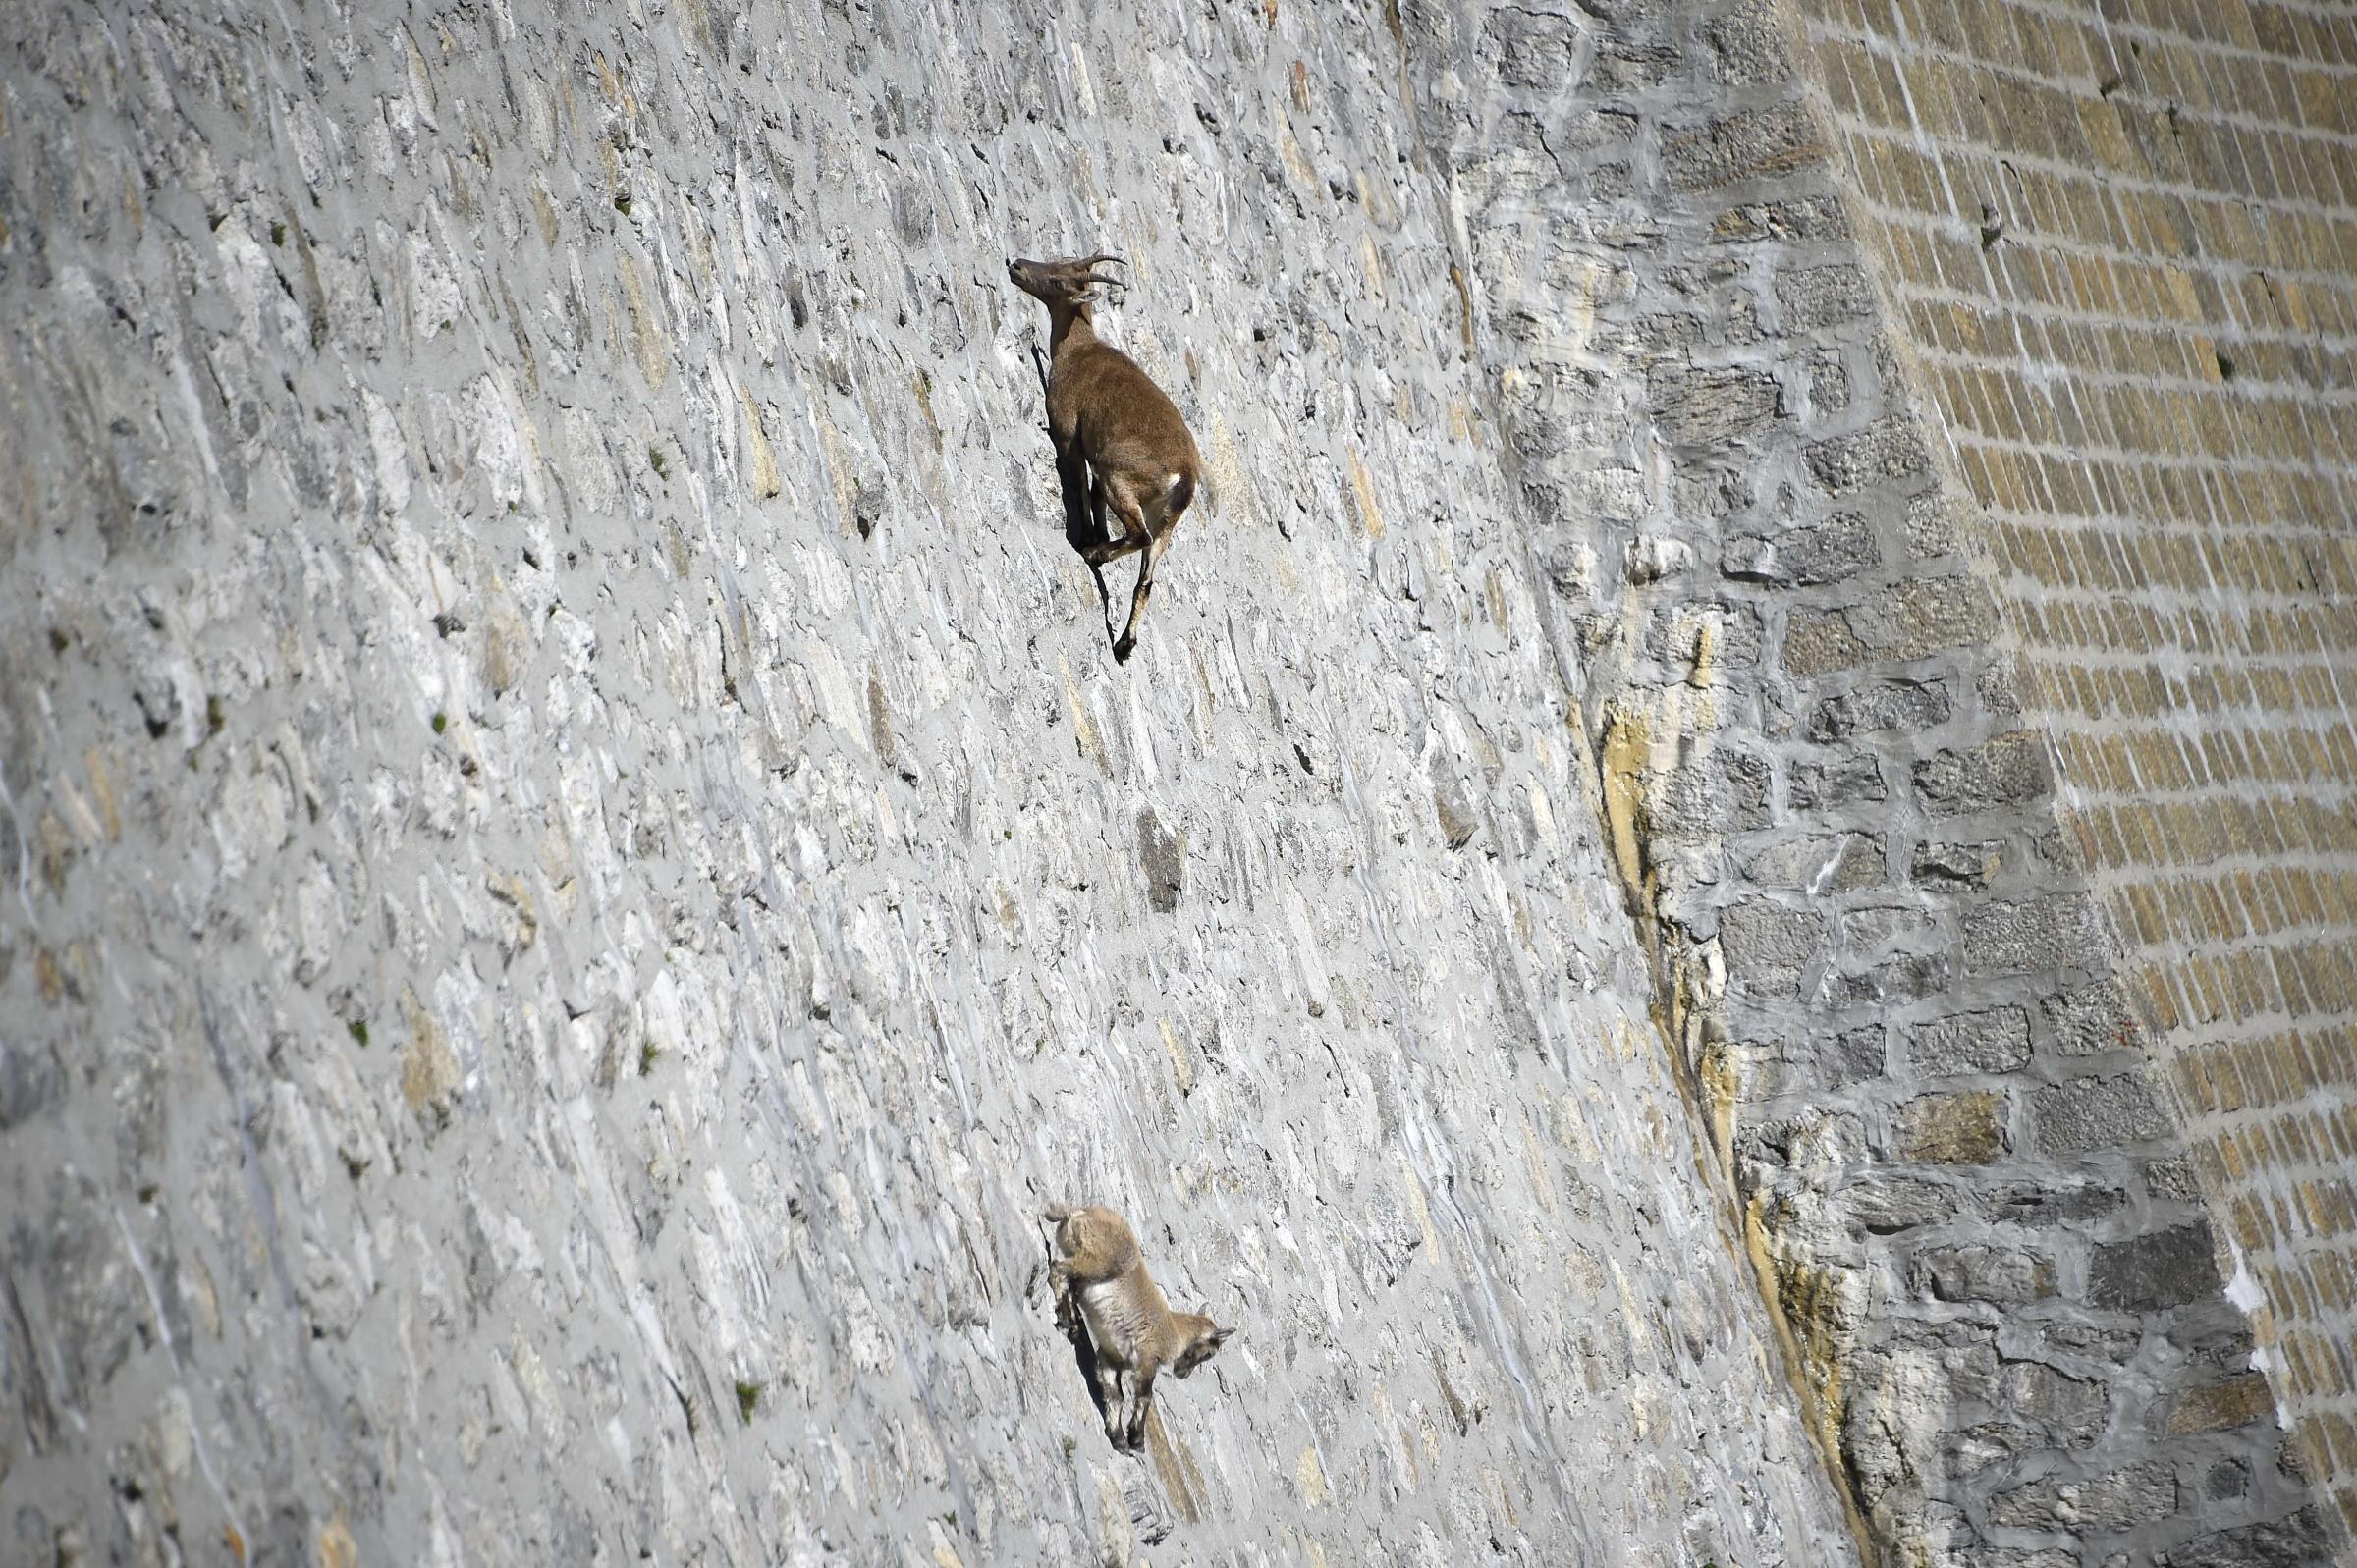 A female Alpine Ibex, a species of wild goat that lives in the mountains of the European Alps, licks stones on a vertical dam (up to 80°) at Cingino Lake on Sept. 22, 2014, near Antrona Piana, Italy.